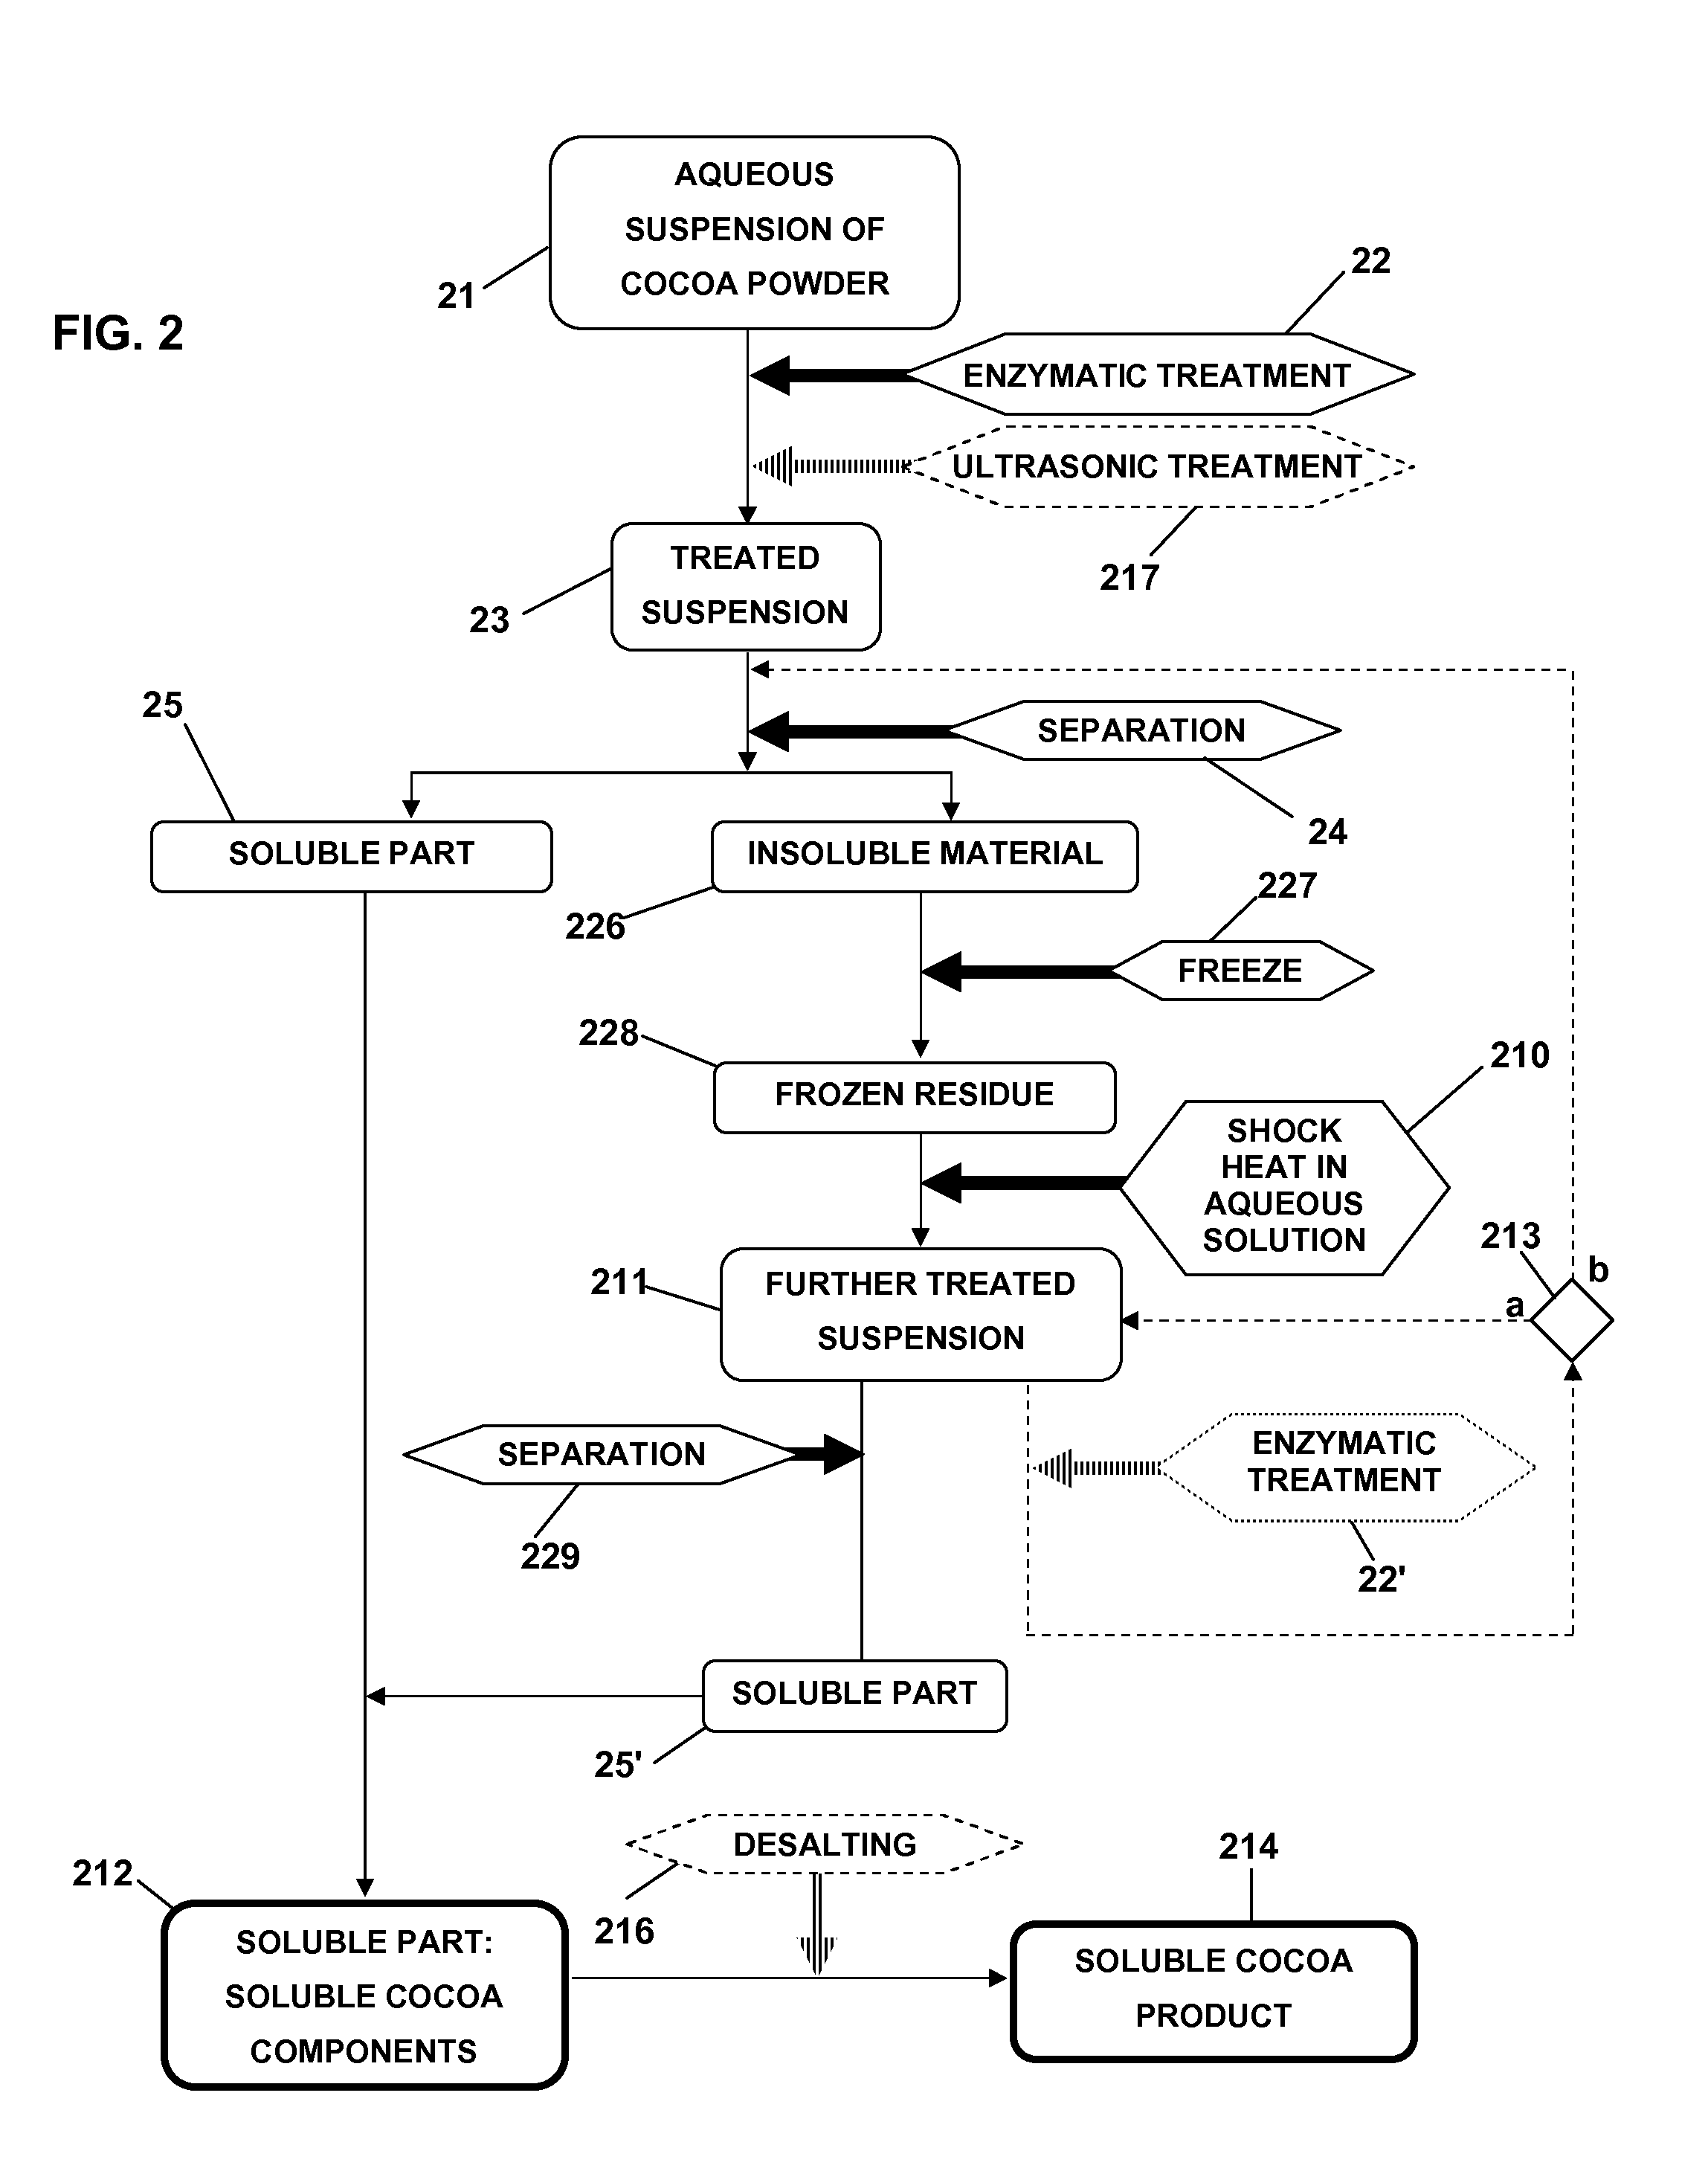 Method for producing a soluble cocoa product from cocoa powder